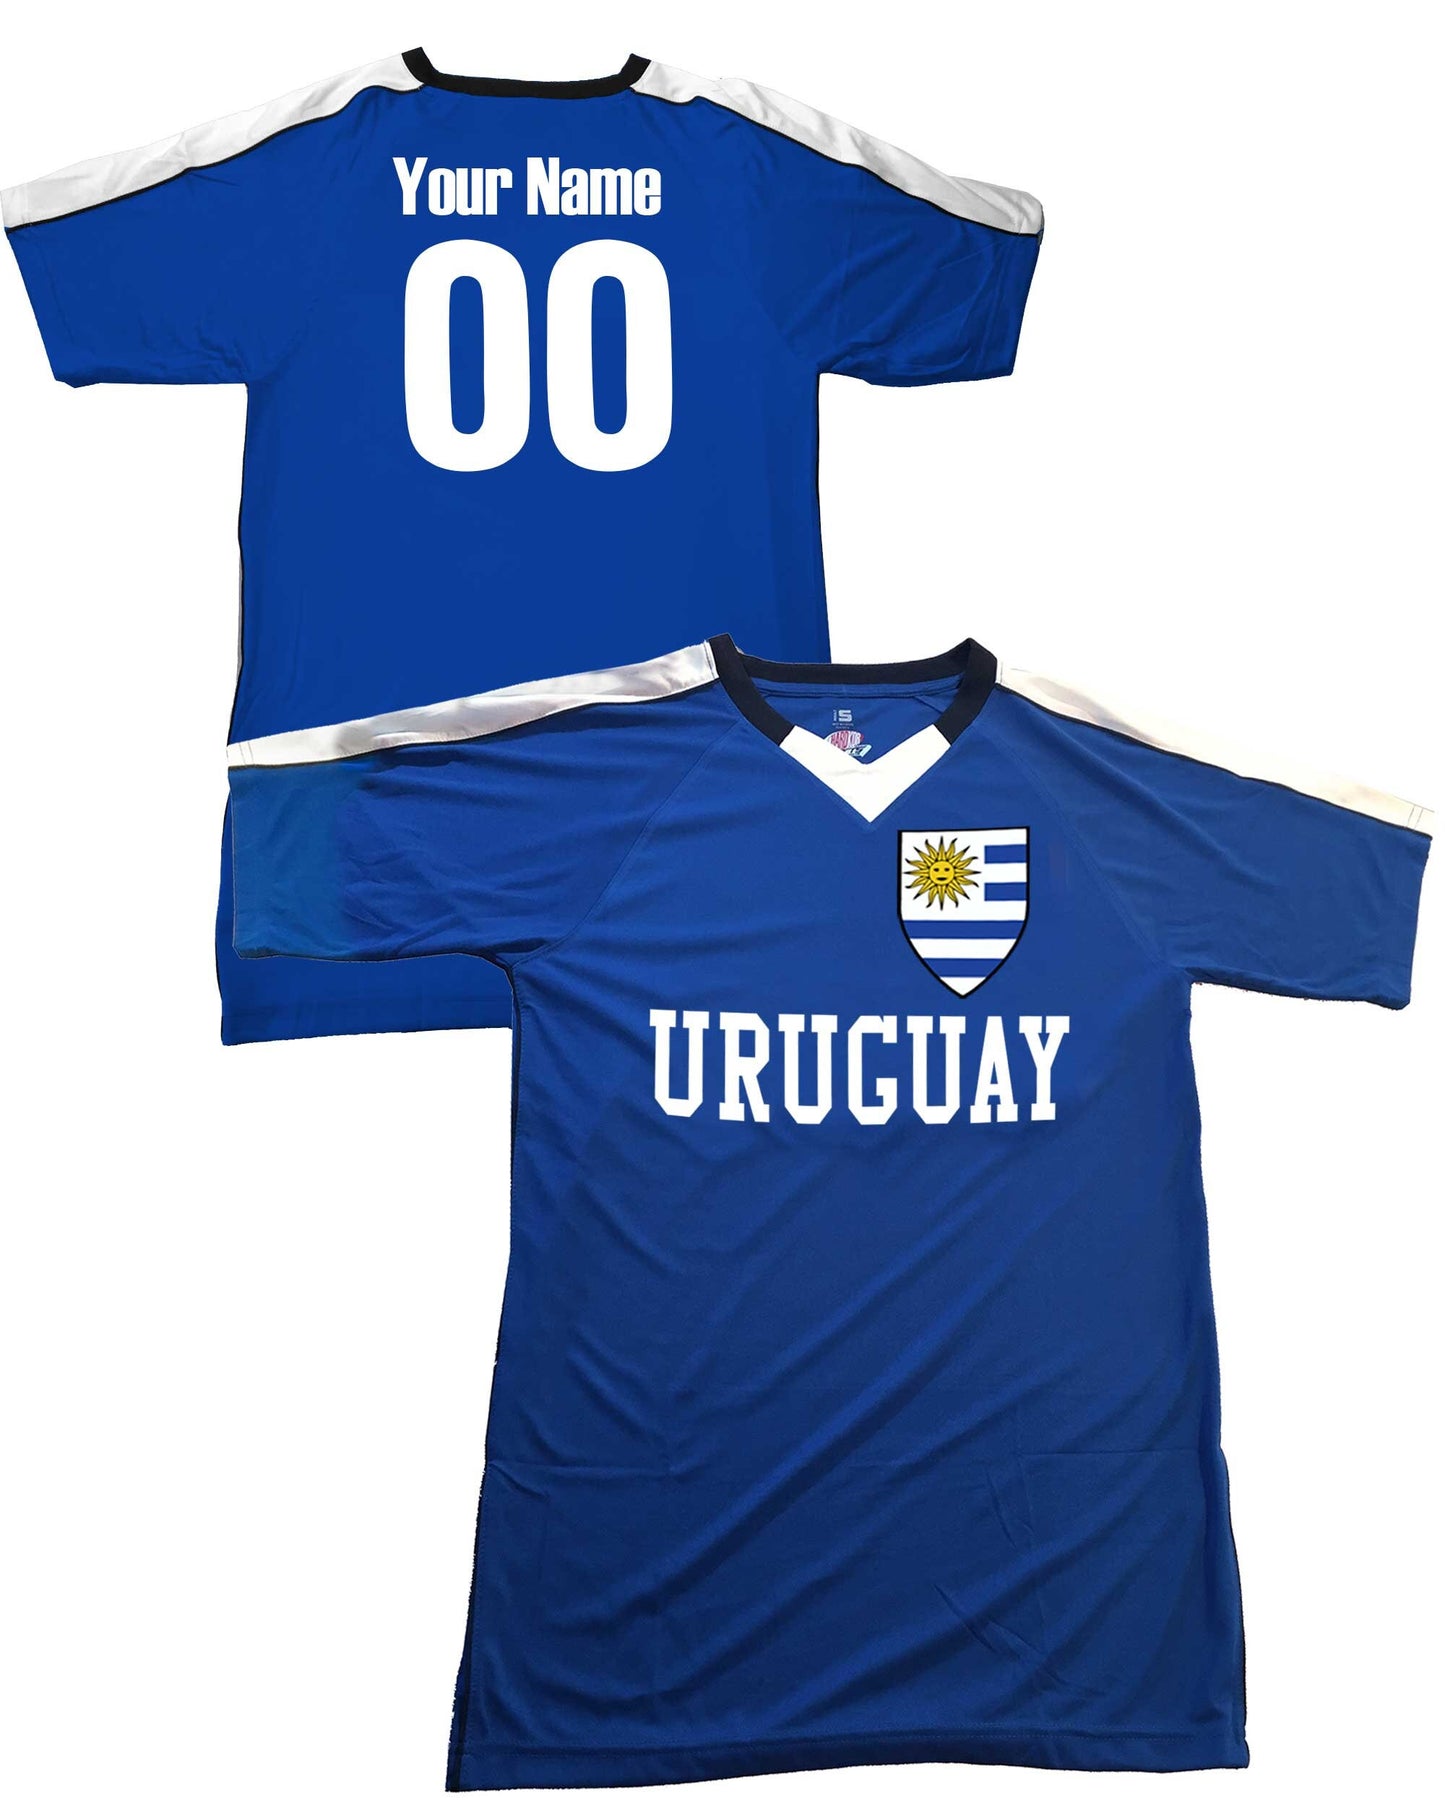 Customize a Uruguayan Soccer Jersey, Unique Uruguay Shield Design, Customized with Your Name and Number on back